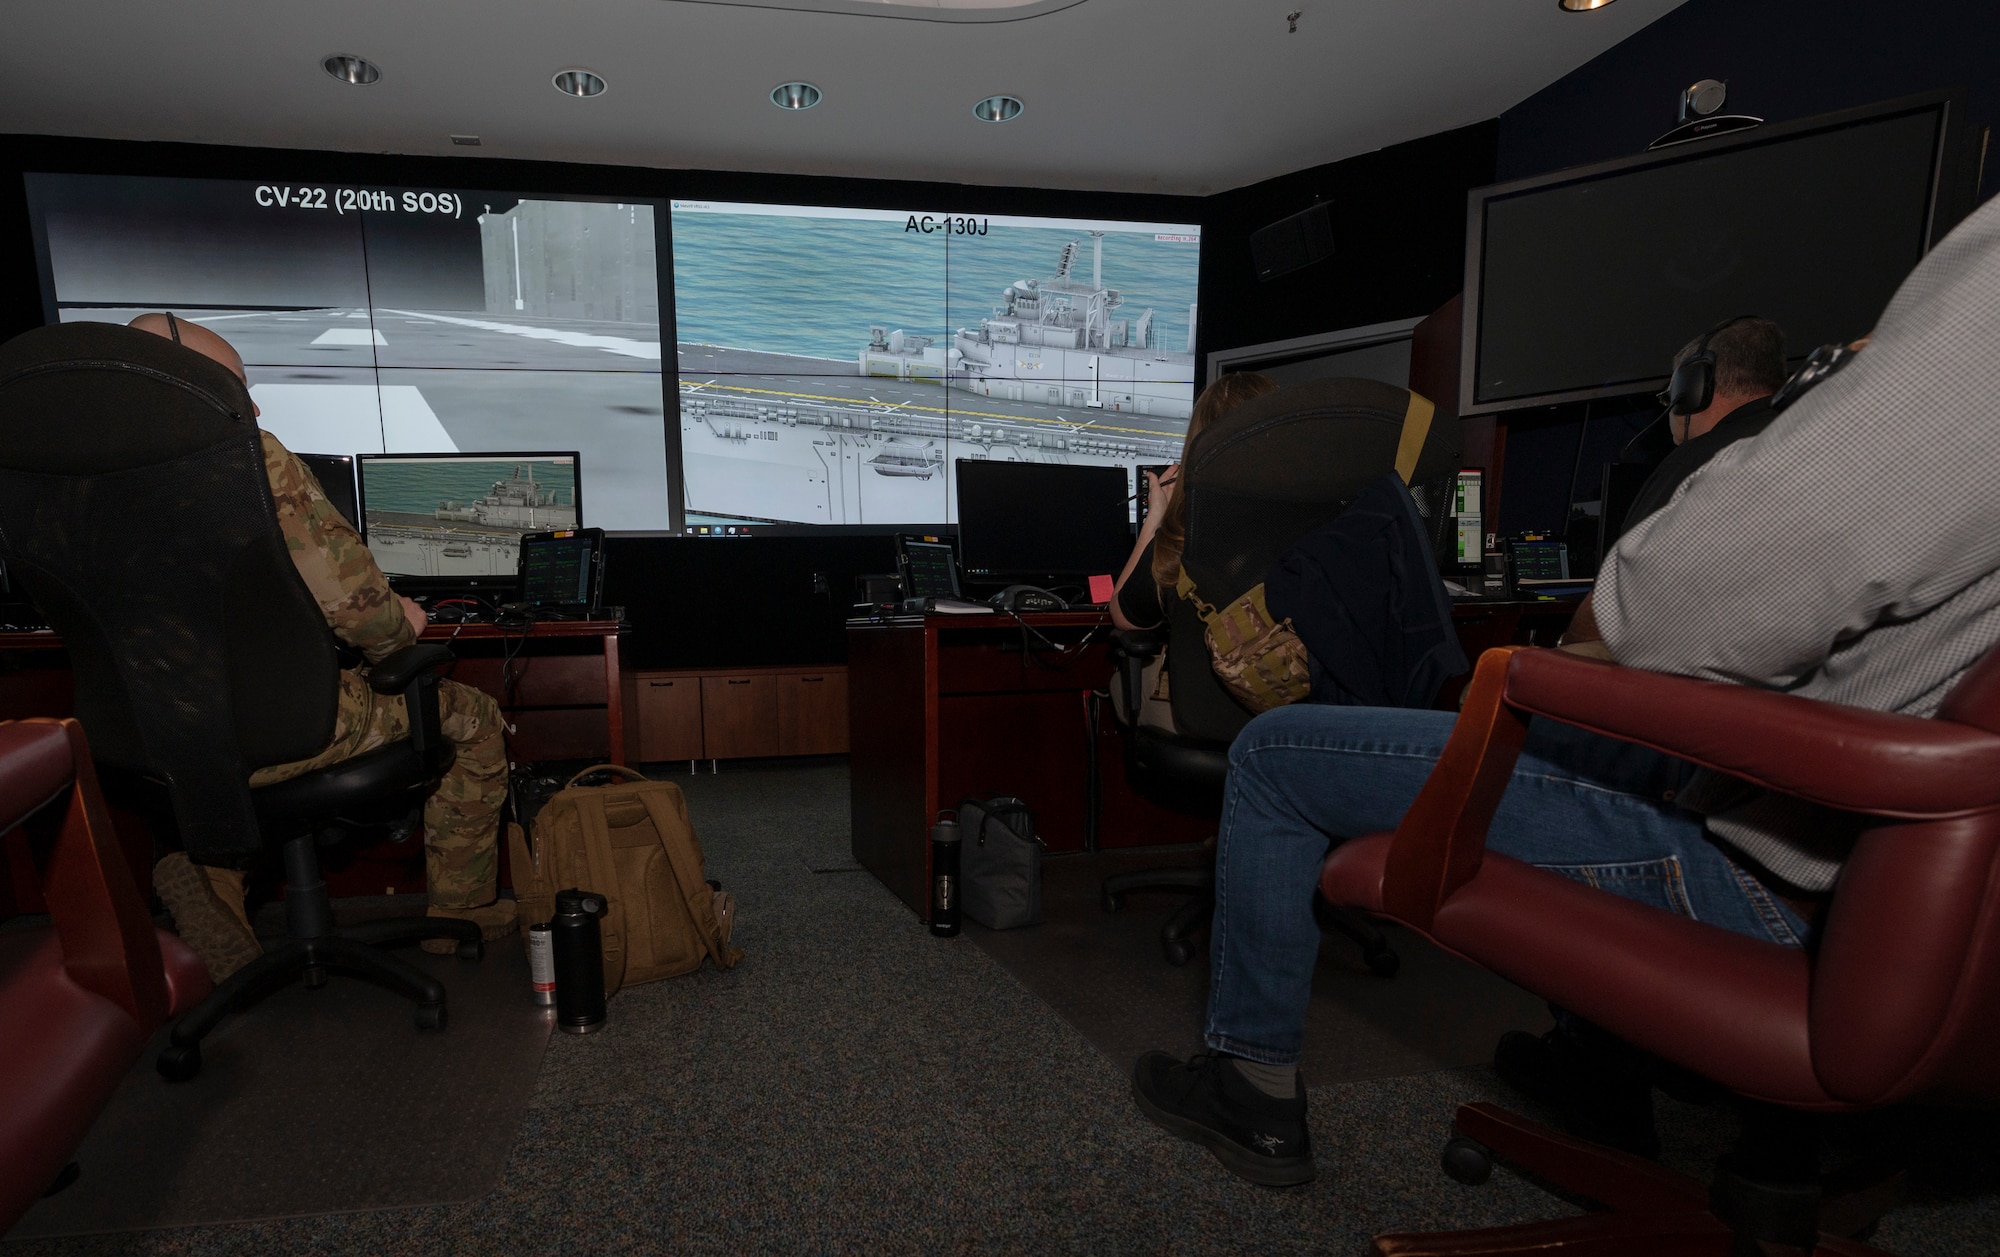 Members from the 492d Special Operations Training Group prepare the virtual simulation environment for the annual Emerald Warrior exercise at Hurlburt Field, Florida, April 26, 2023.